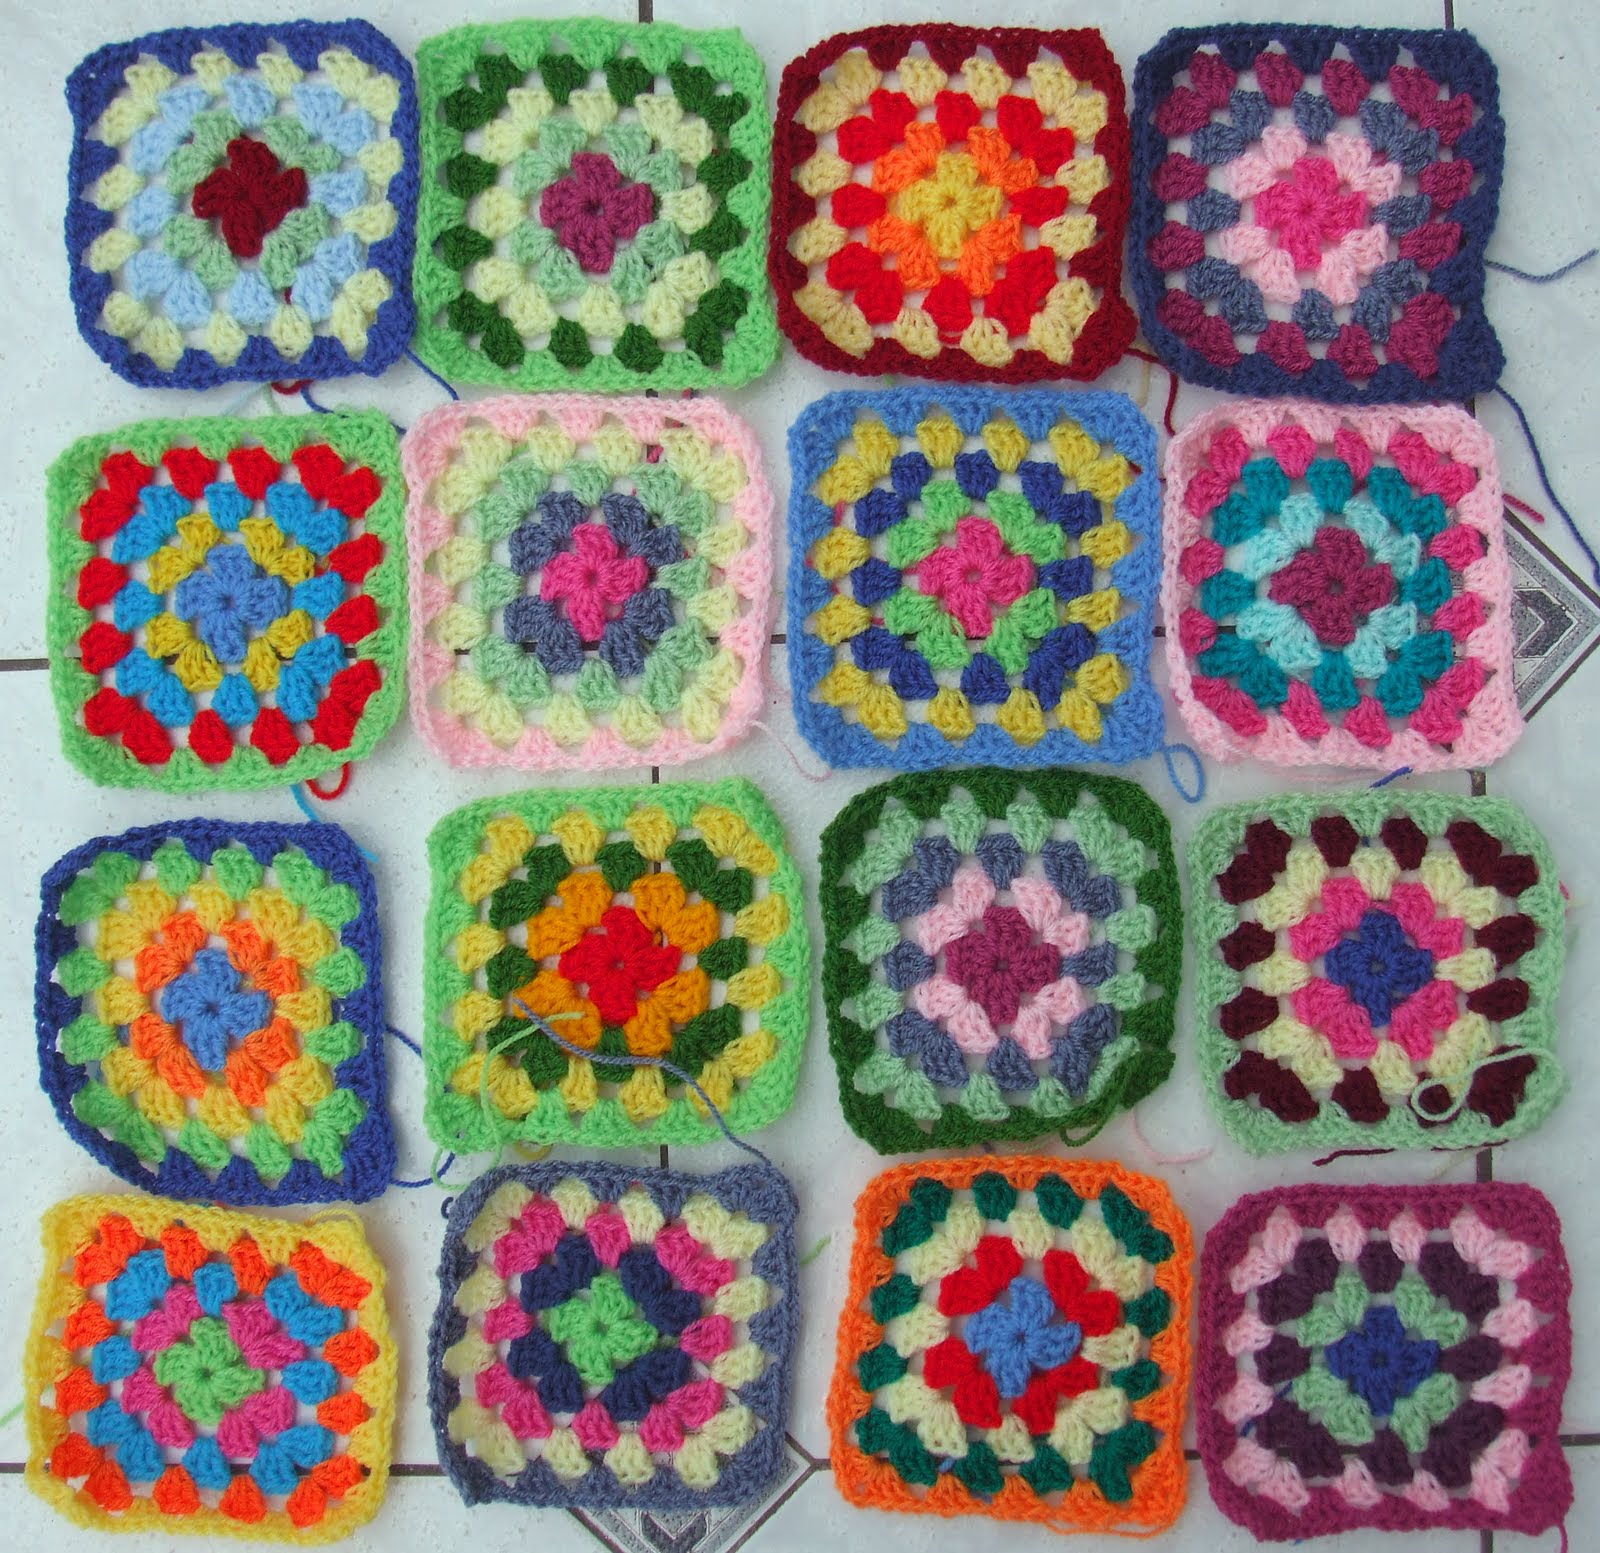 Granny Squares, Freezing Fog and Pink Snow - WoolnHook by Leonie Morgan